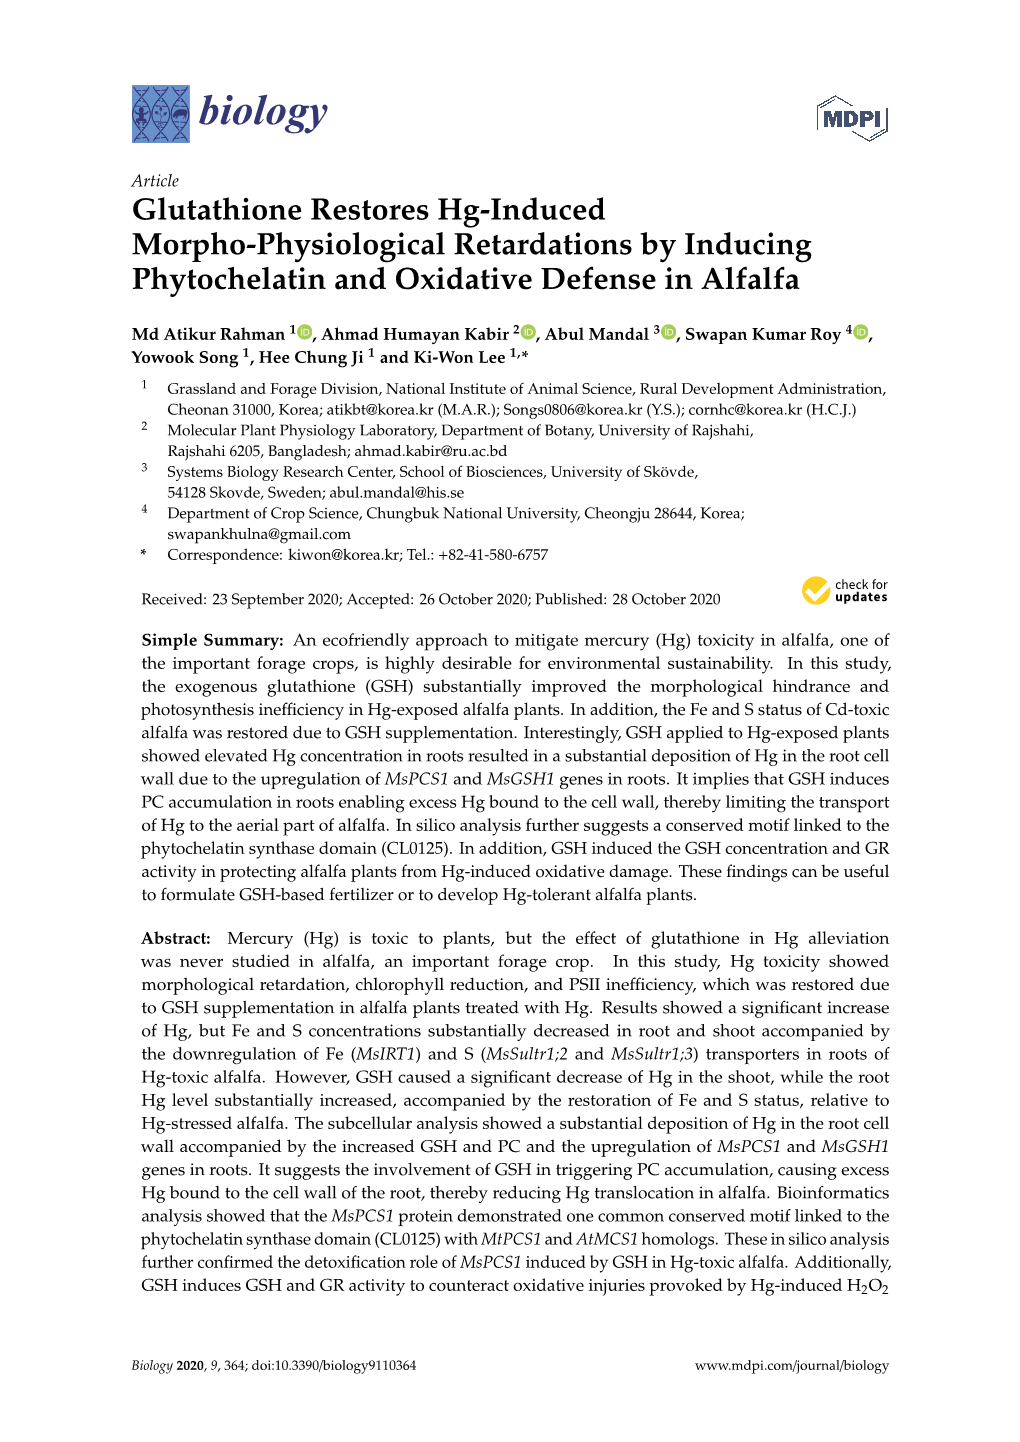 Glutathione Restores Hg-Induced Morpho-Physiological Retardations by Inducing Phytochelatin and Oxidative Defense in Alfalfa